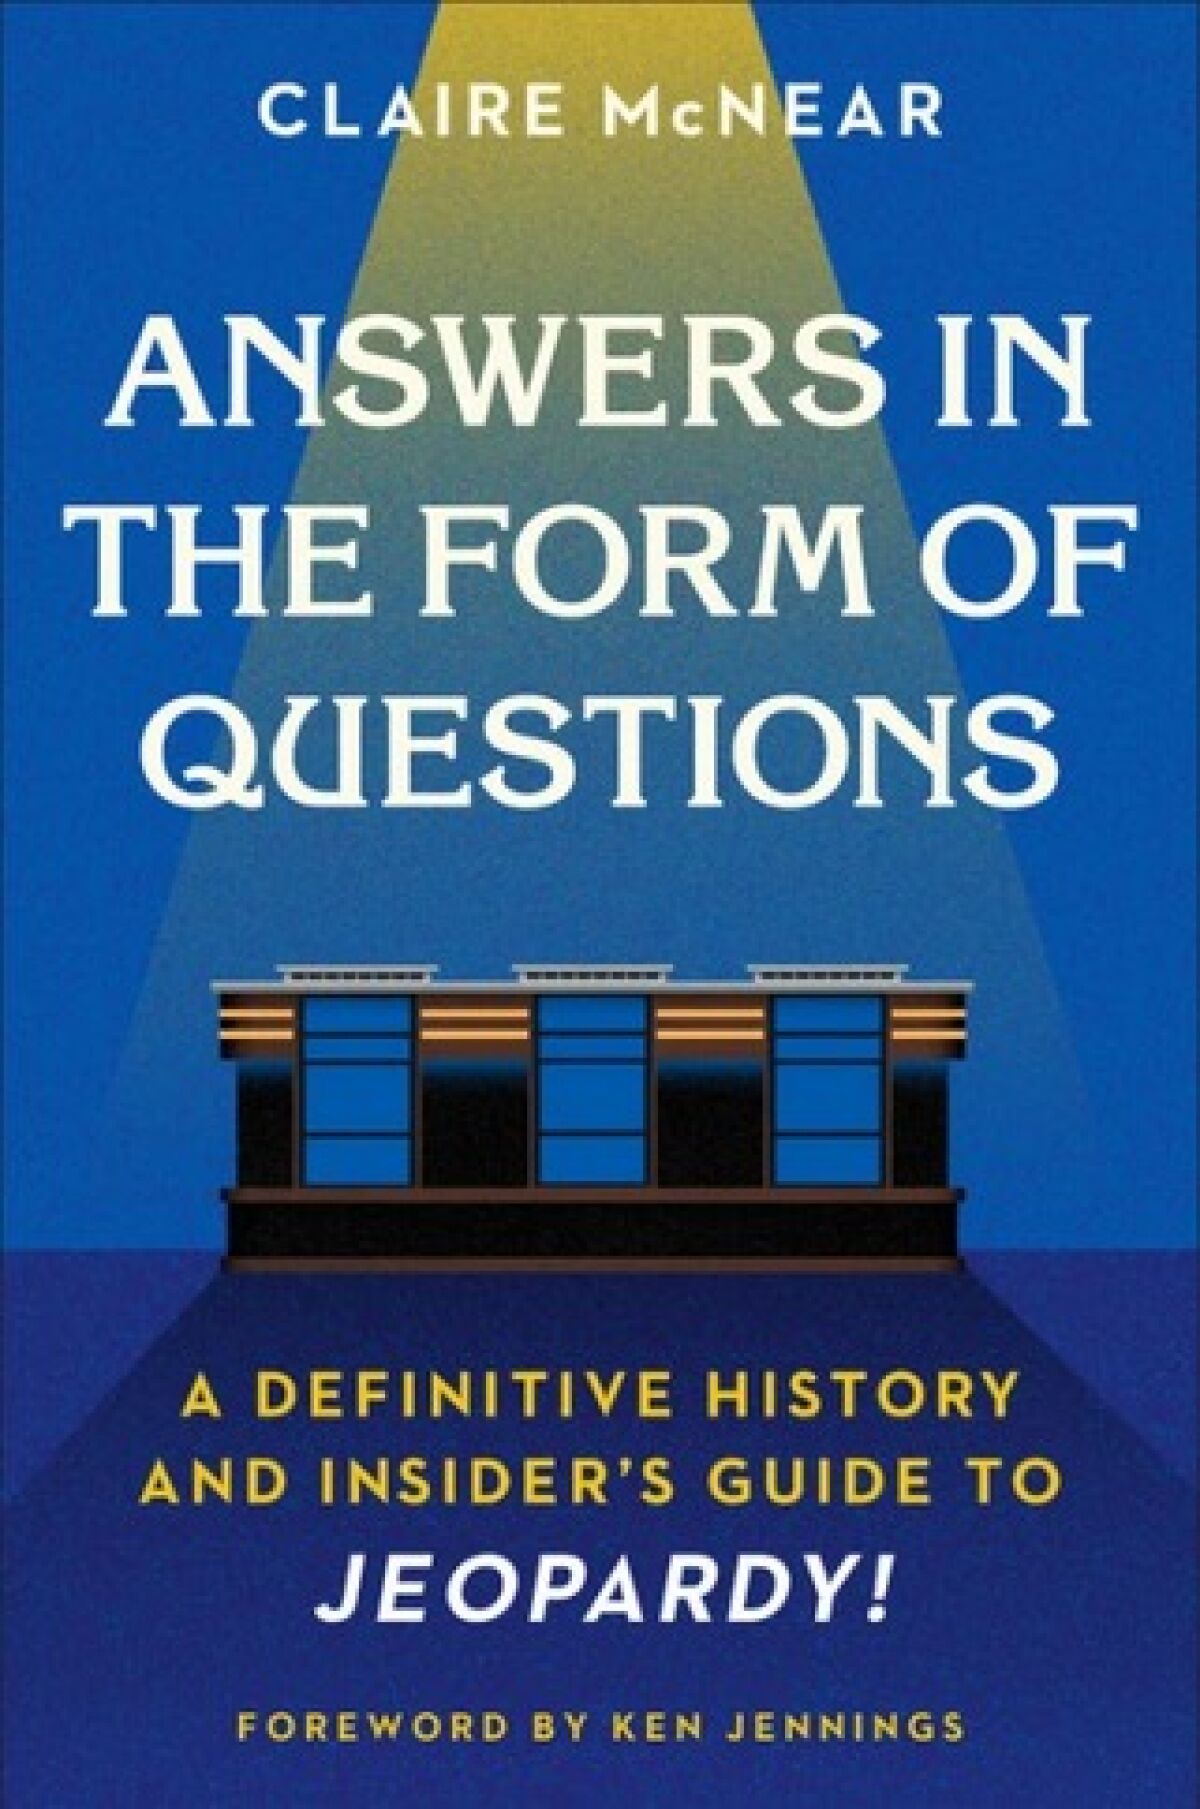 Book jacket for “Answers in the Form of Questions: A Definitive History and Insider's Guide to Jeopardy!” by Claire McNear.